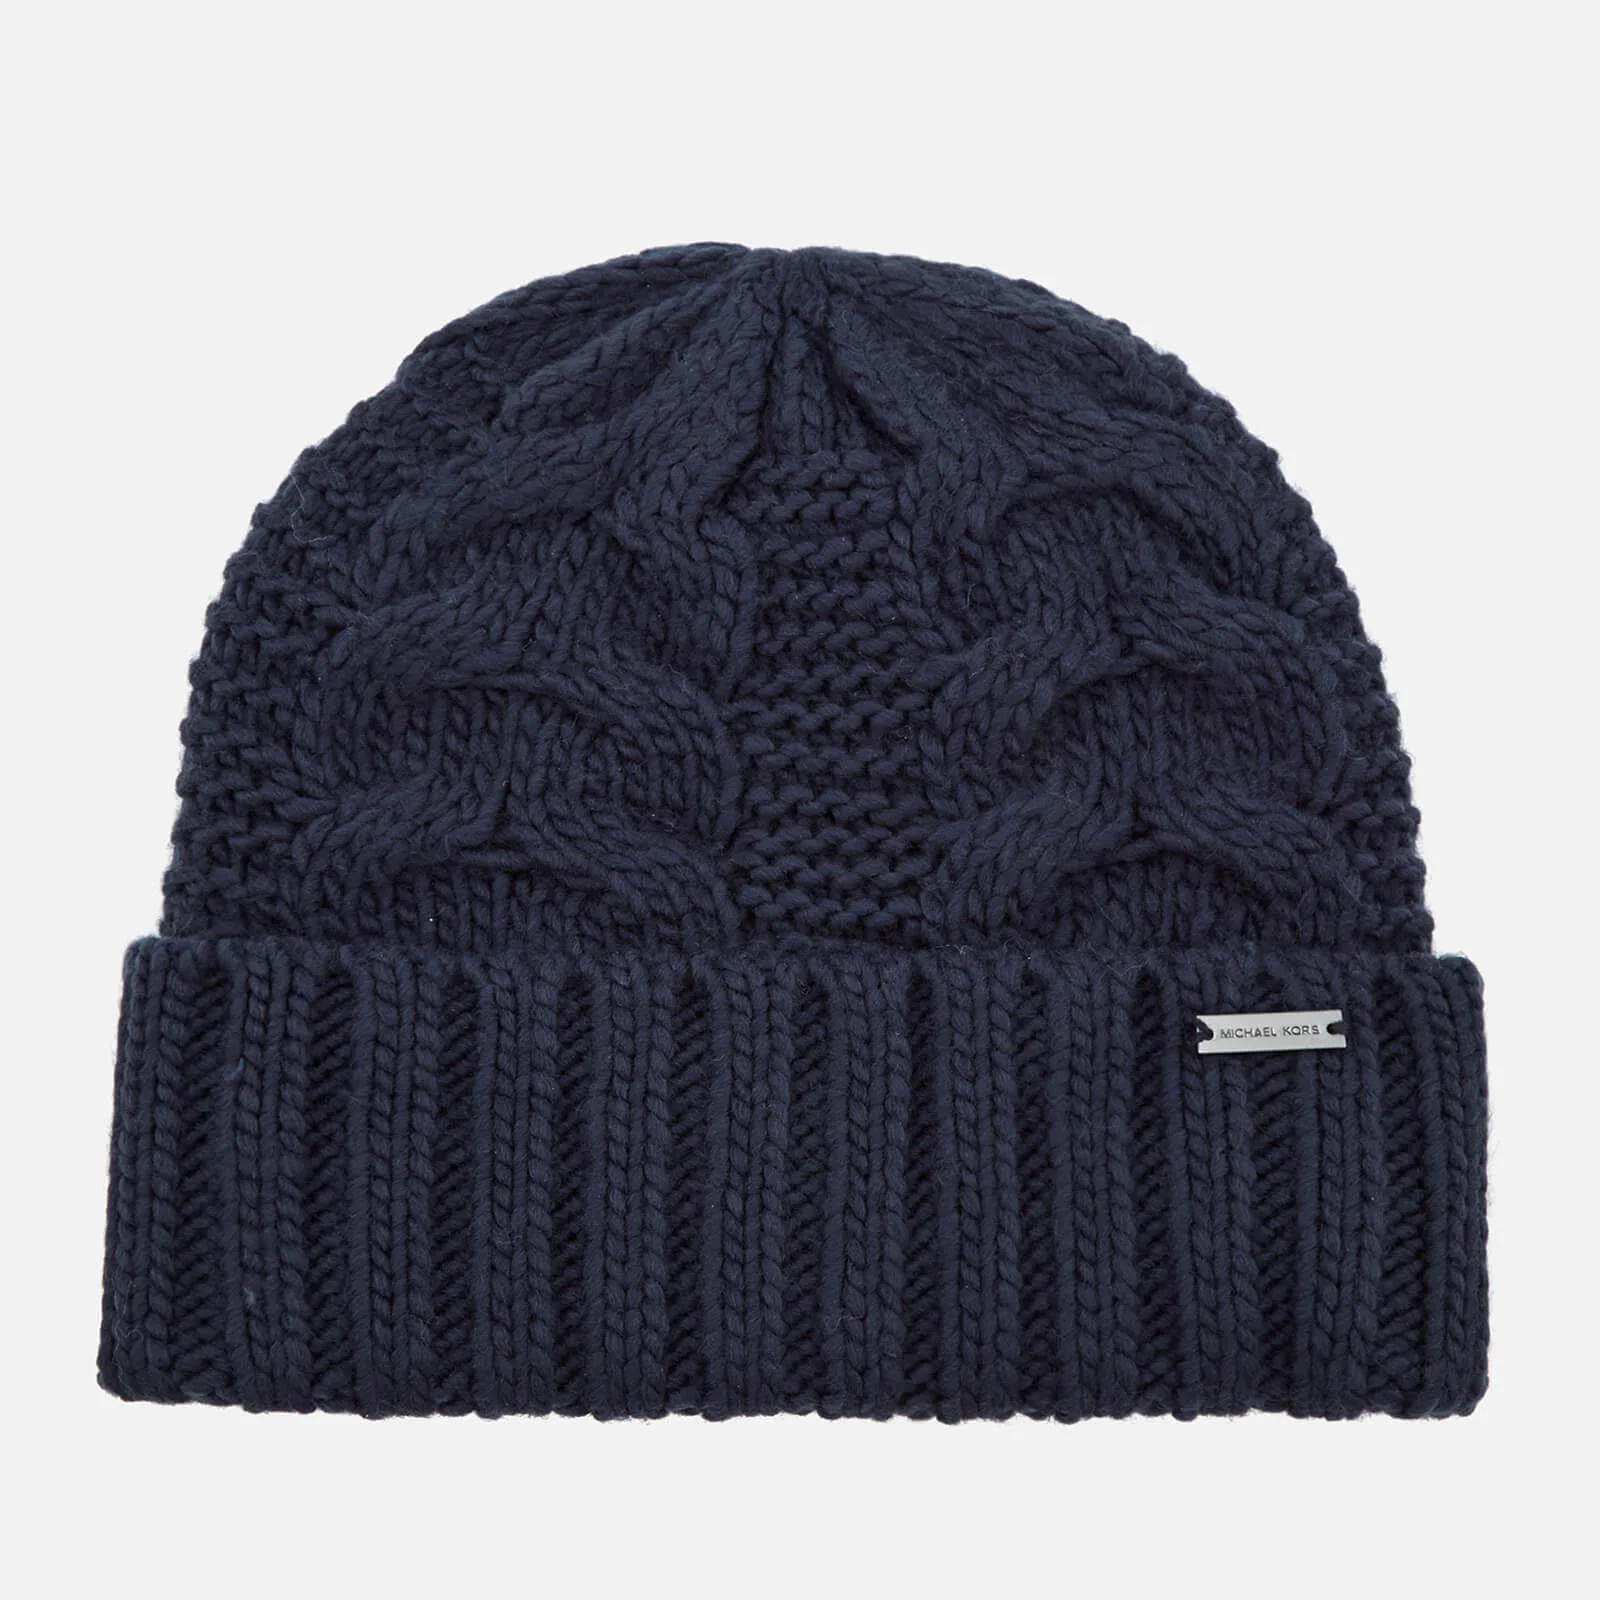 Michael Kors Men's Link Cable Cuff Hat - Midnight Image 1